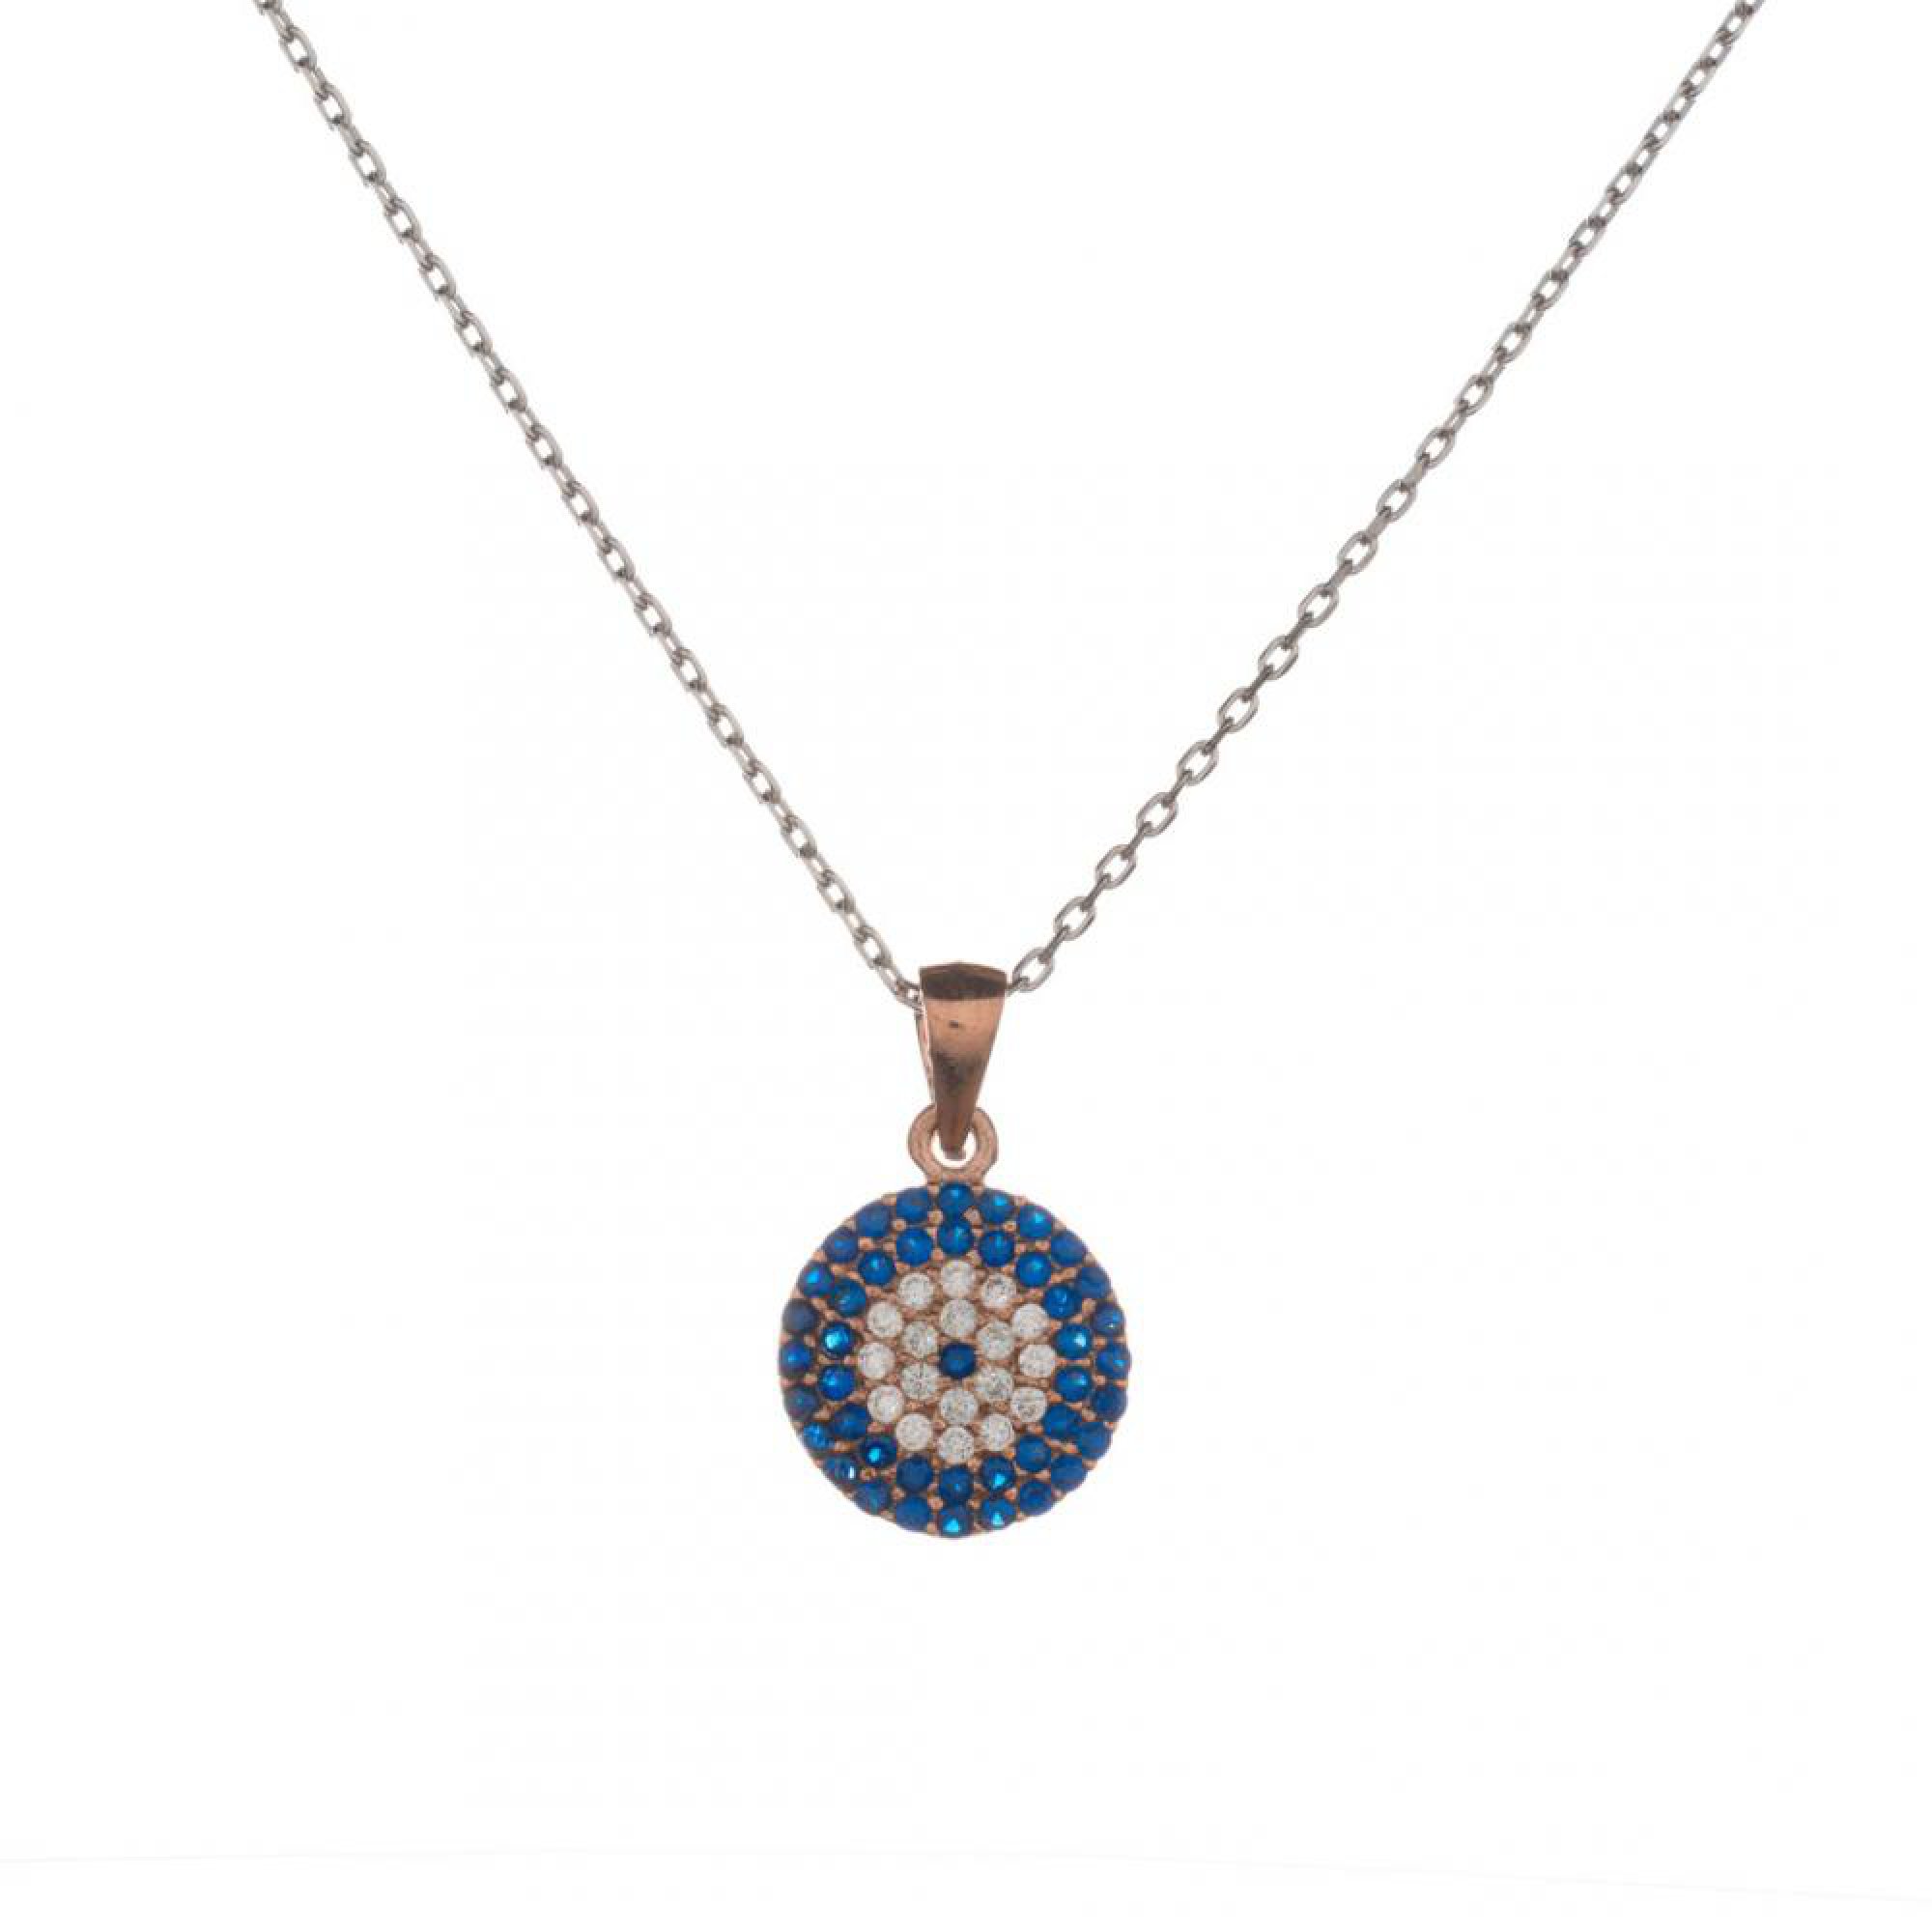 Eye pendant necklace with zircon stones in gold rose